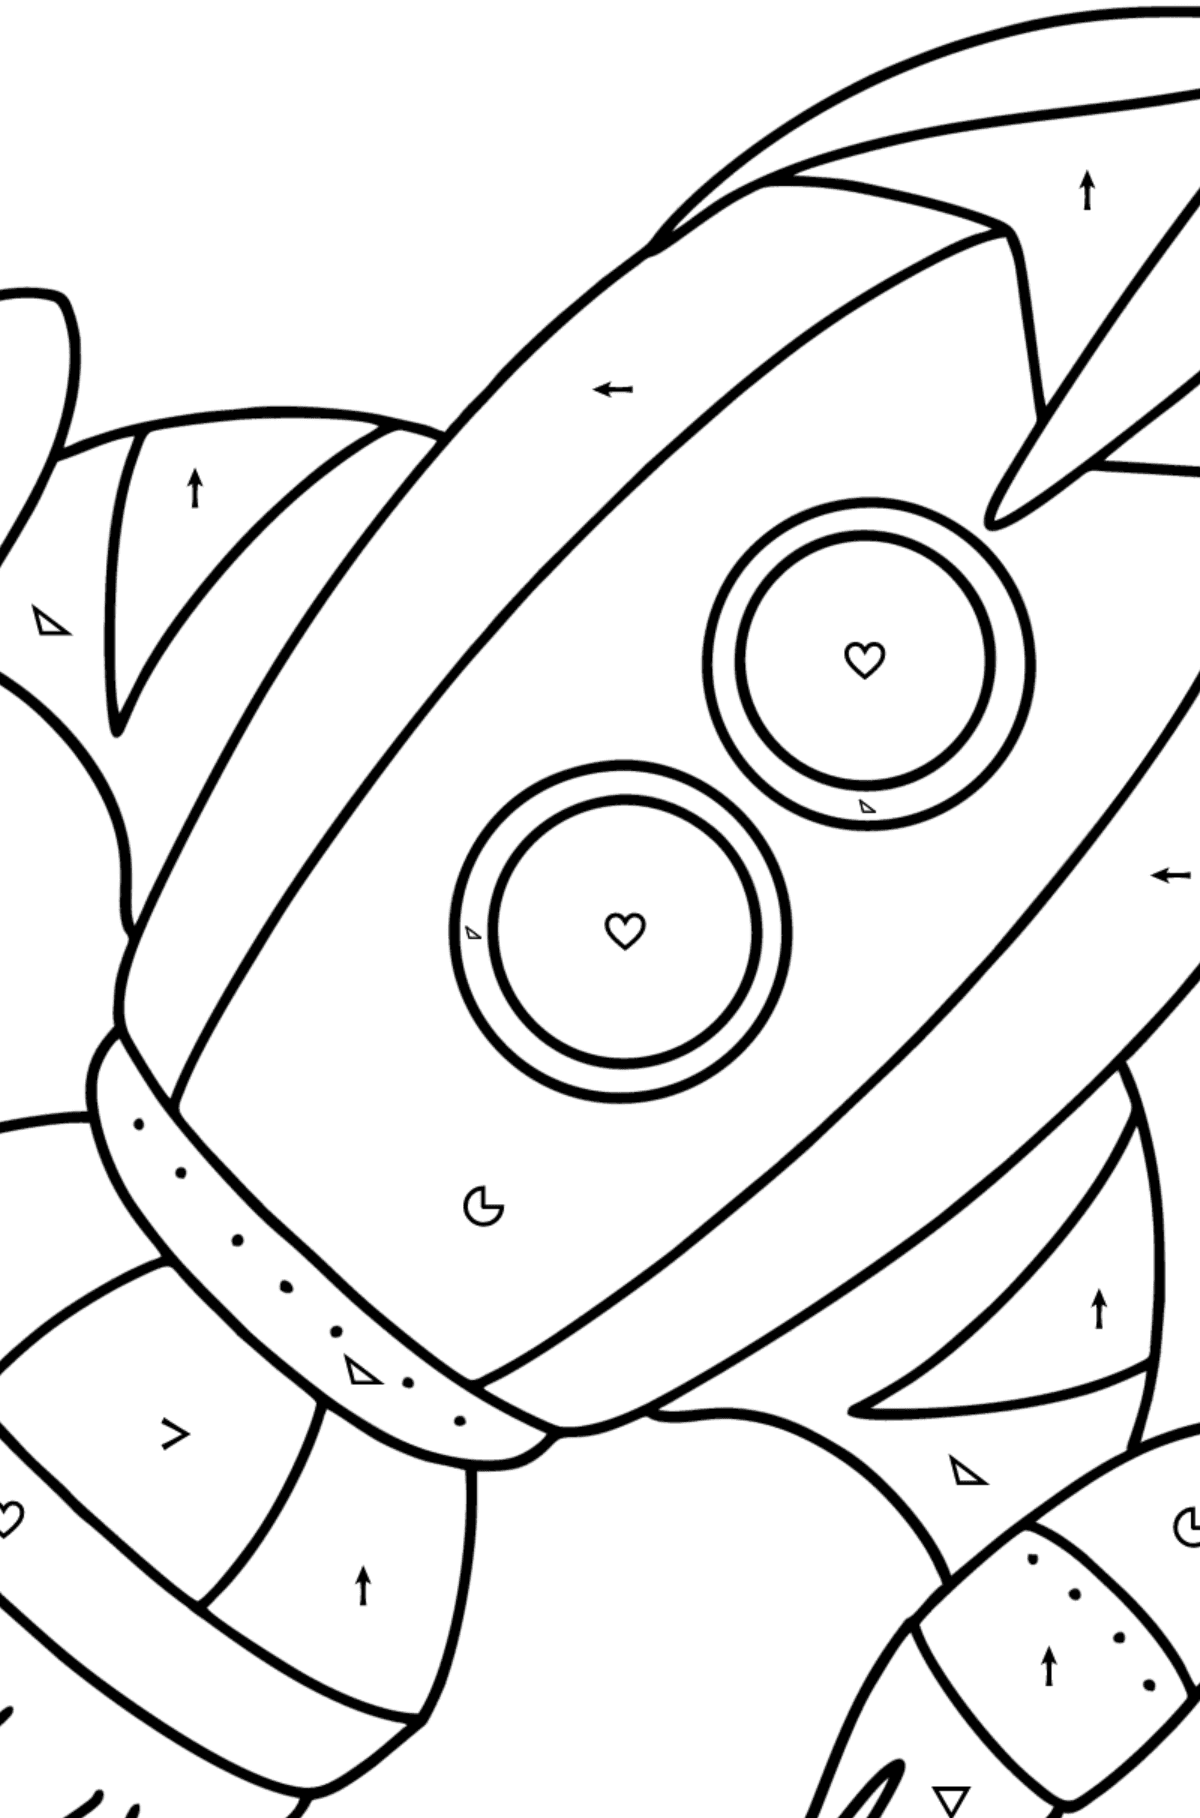 Cartoon rocket coloring page - Coloring by Symbols and Geometric Shapes for Kids